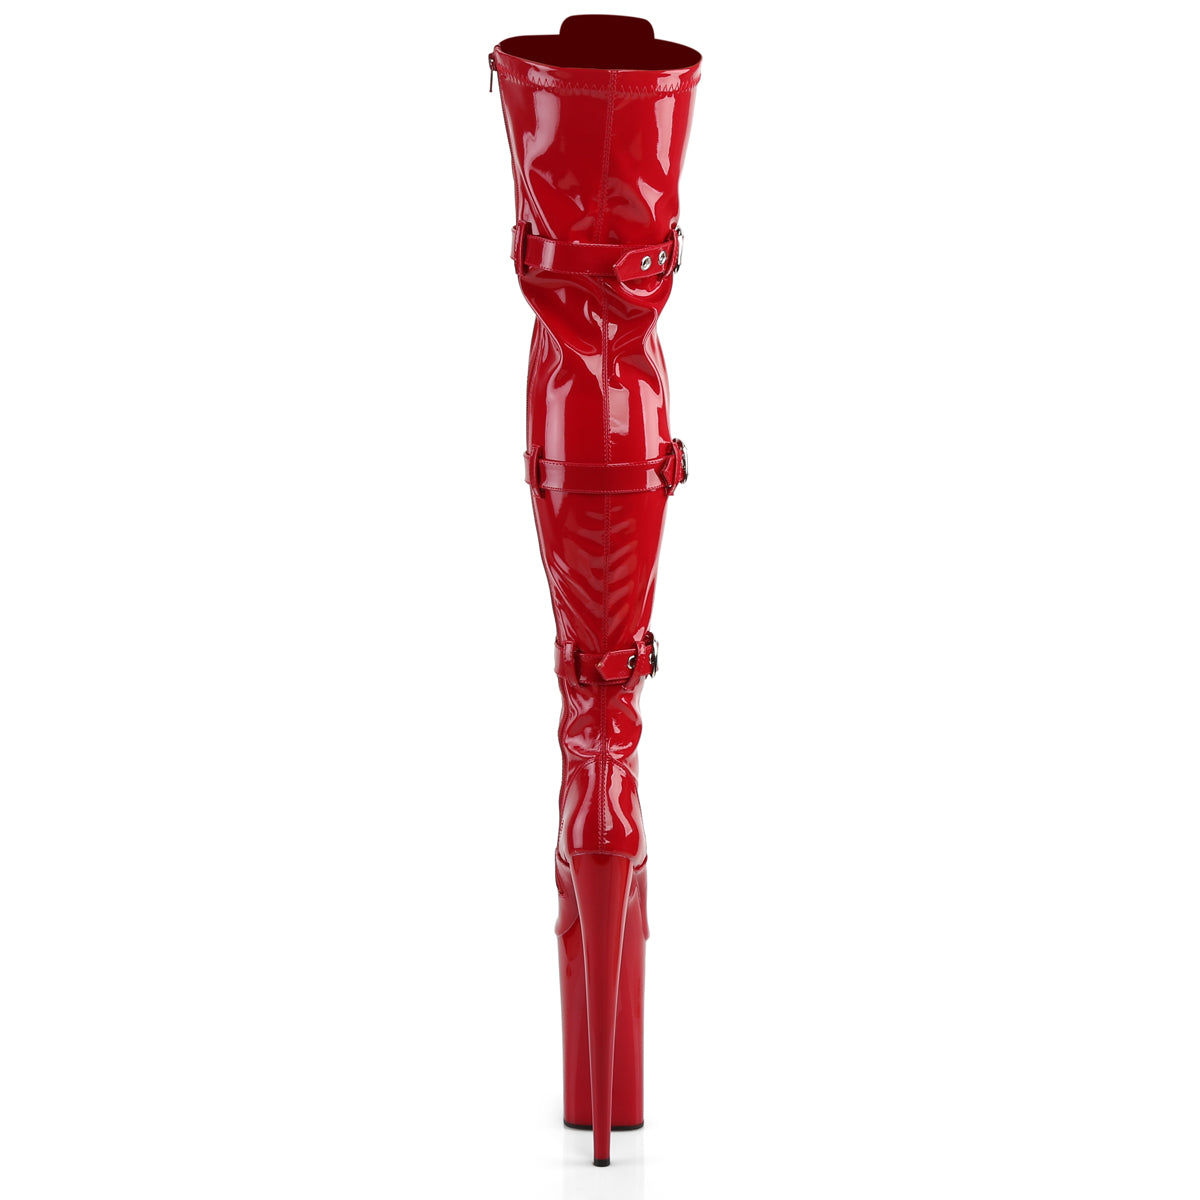 BEYOND-3028 Red Stretch Patent/Red Boot Pleaser